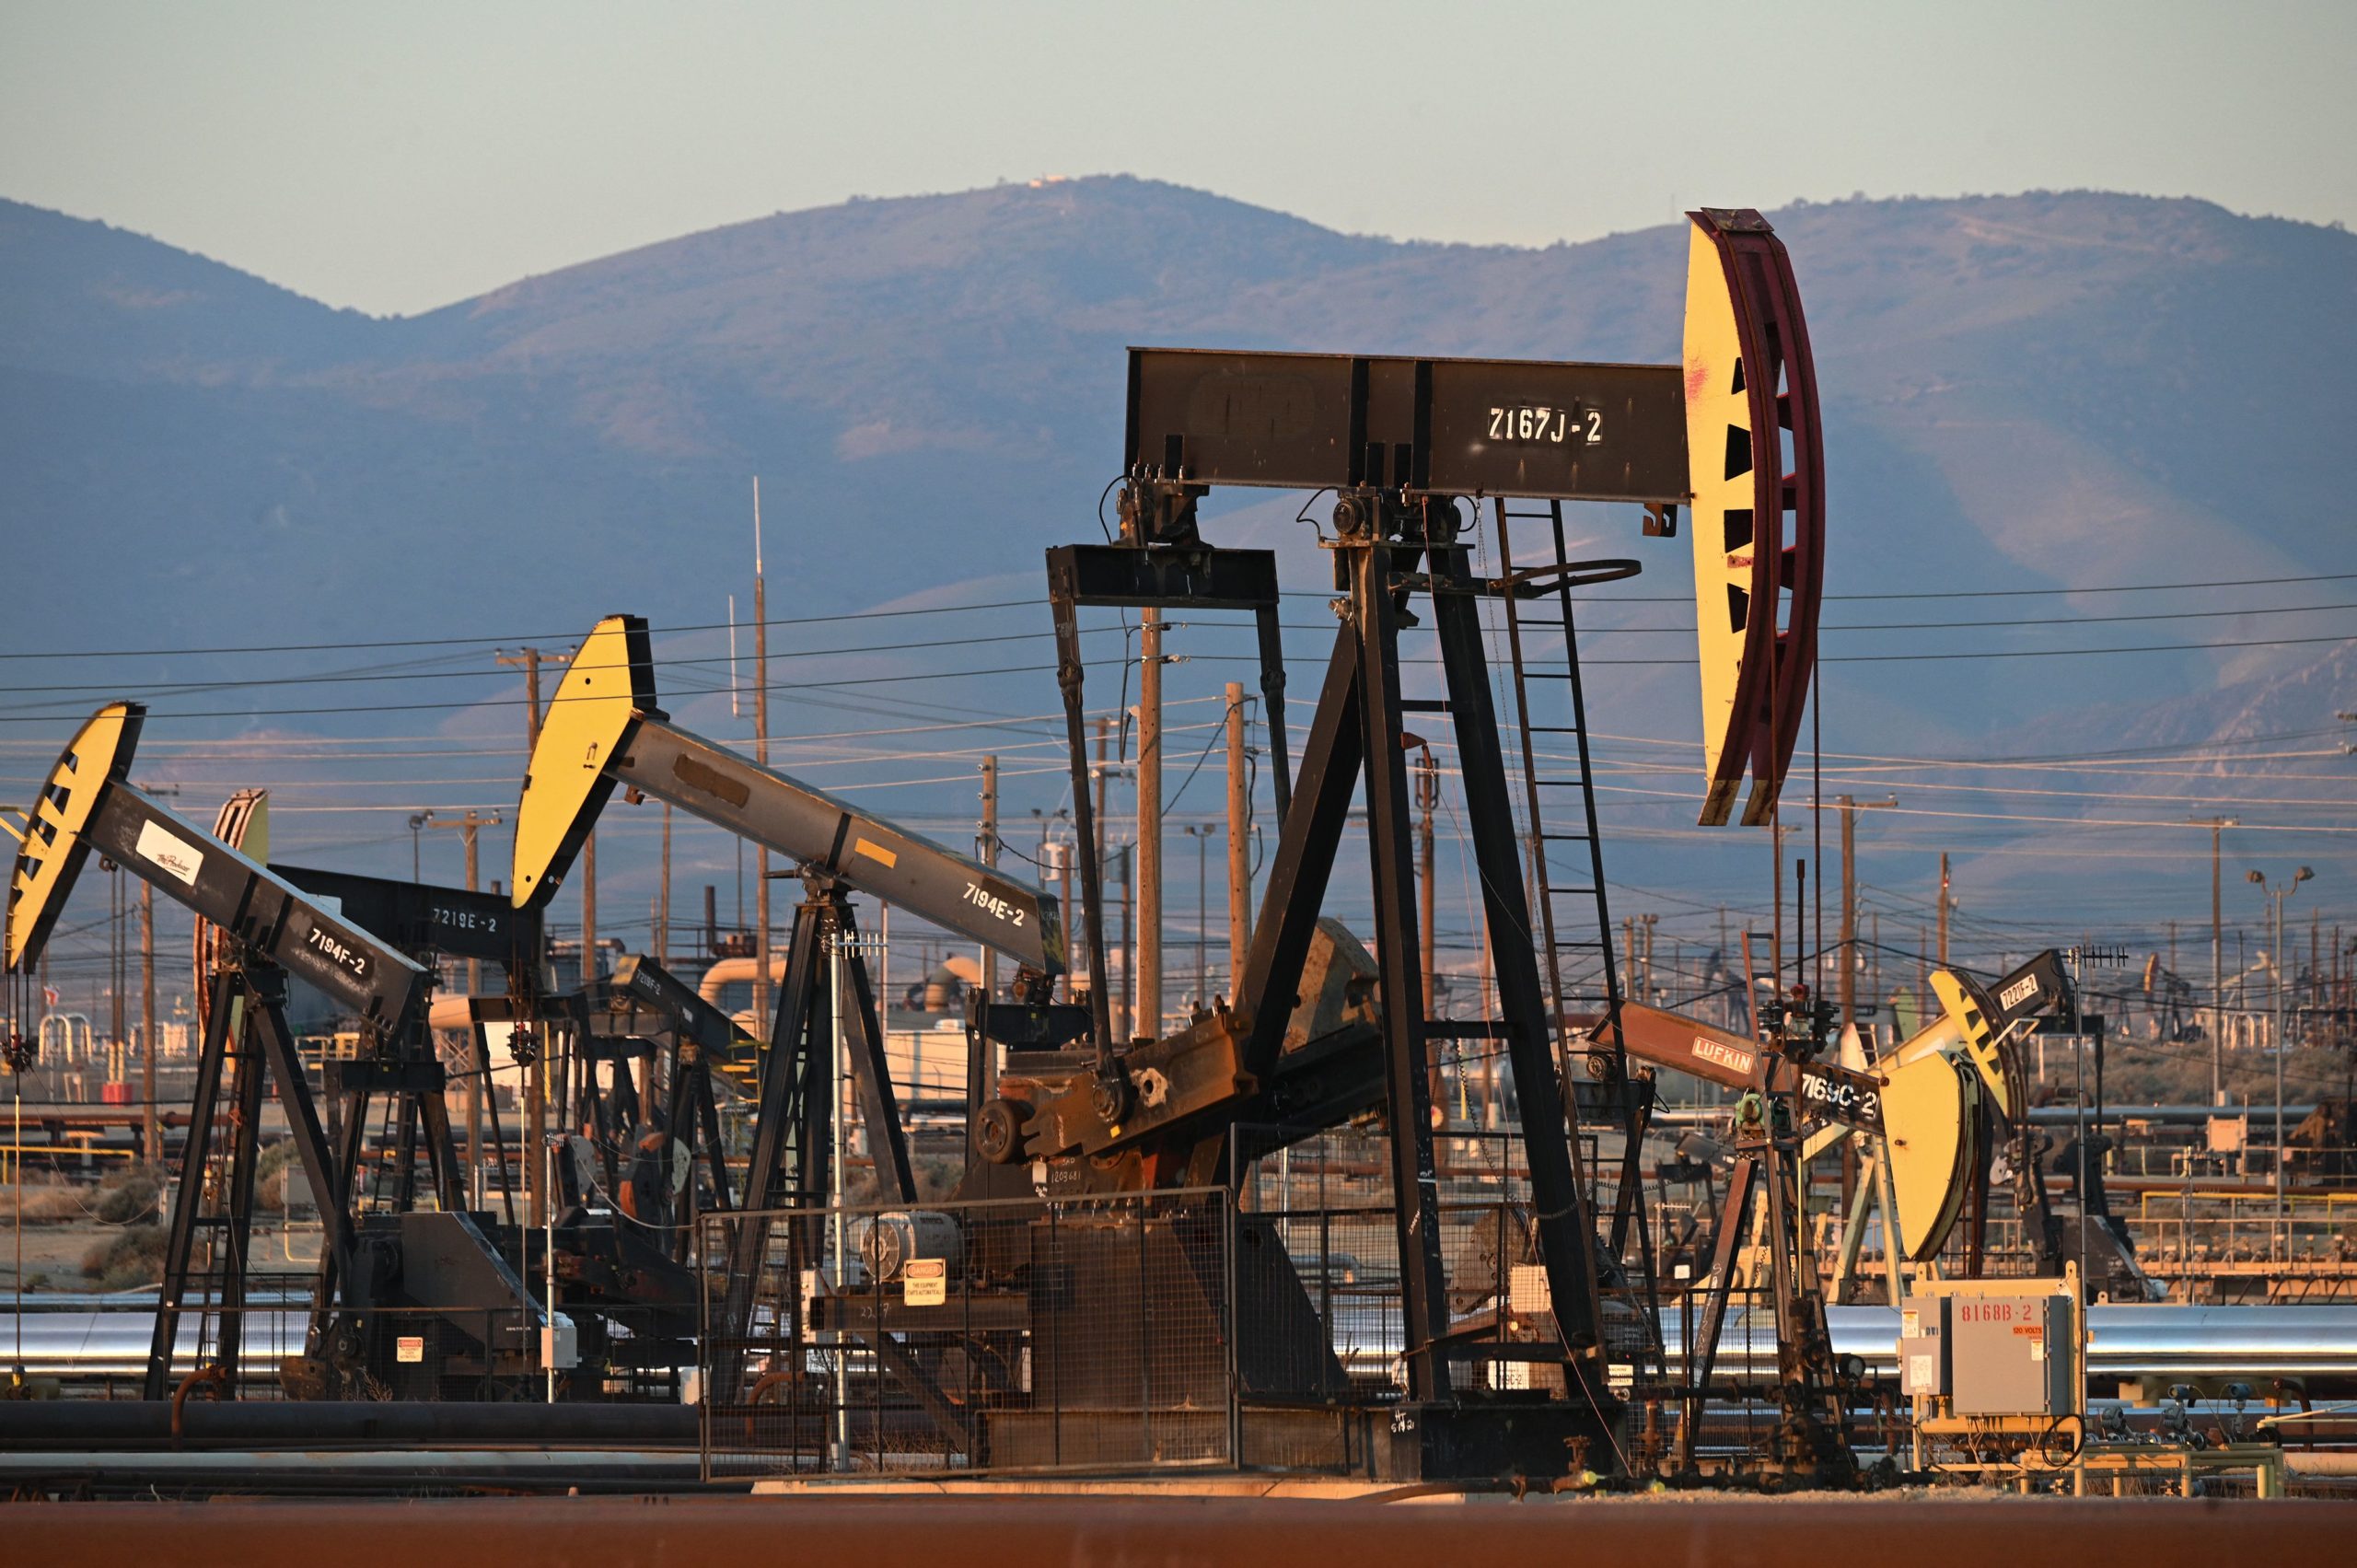 Active pump jacks increase pressure to draw oil toward the surface at the South Belridge Oil Field on Feb. 26 in Kern County, California. (Robyn Beck/AFP via Getty Images)